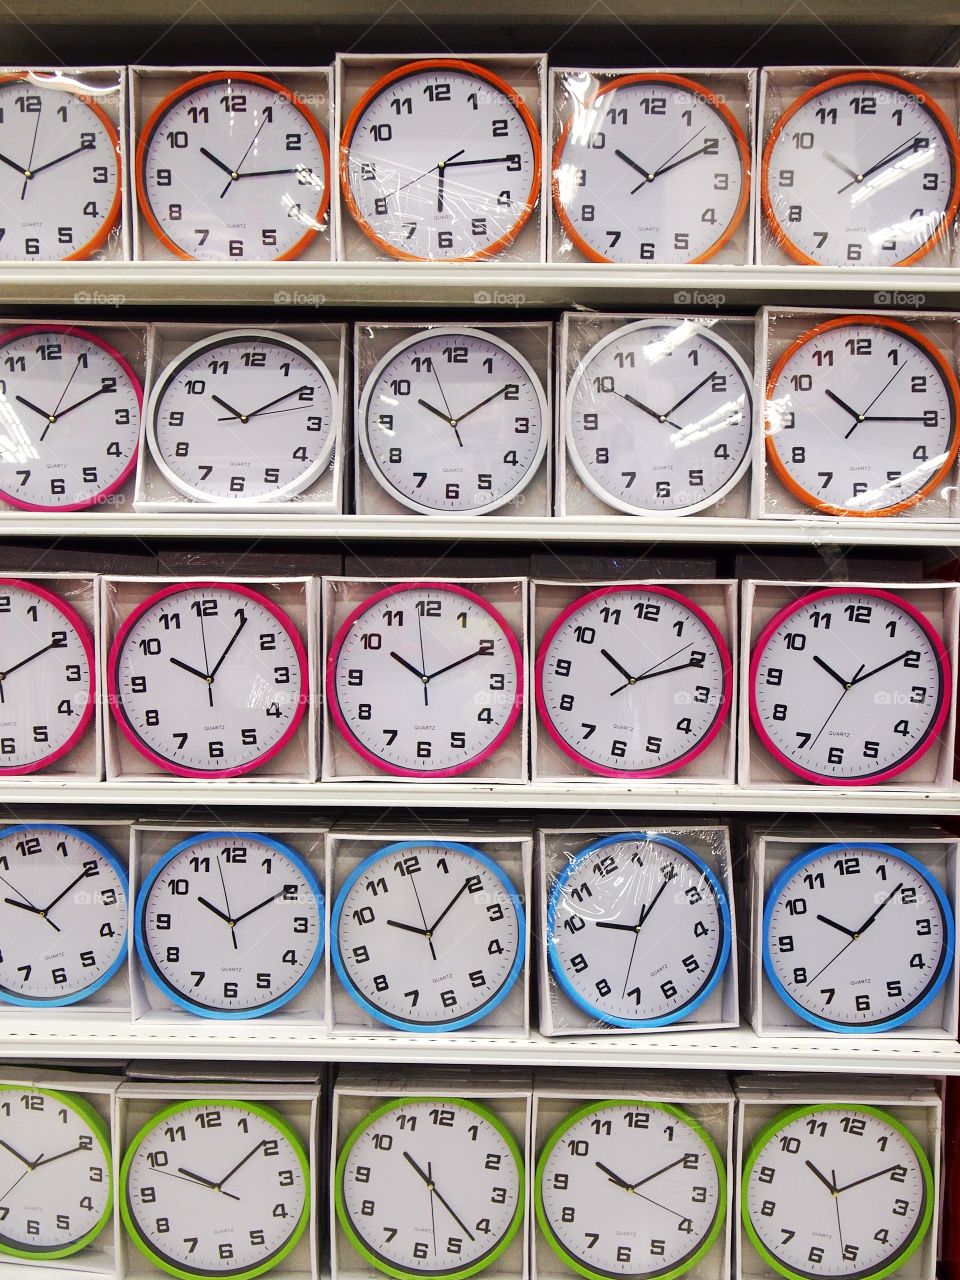 colored wall clocks on display at a store